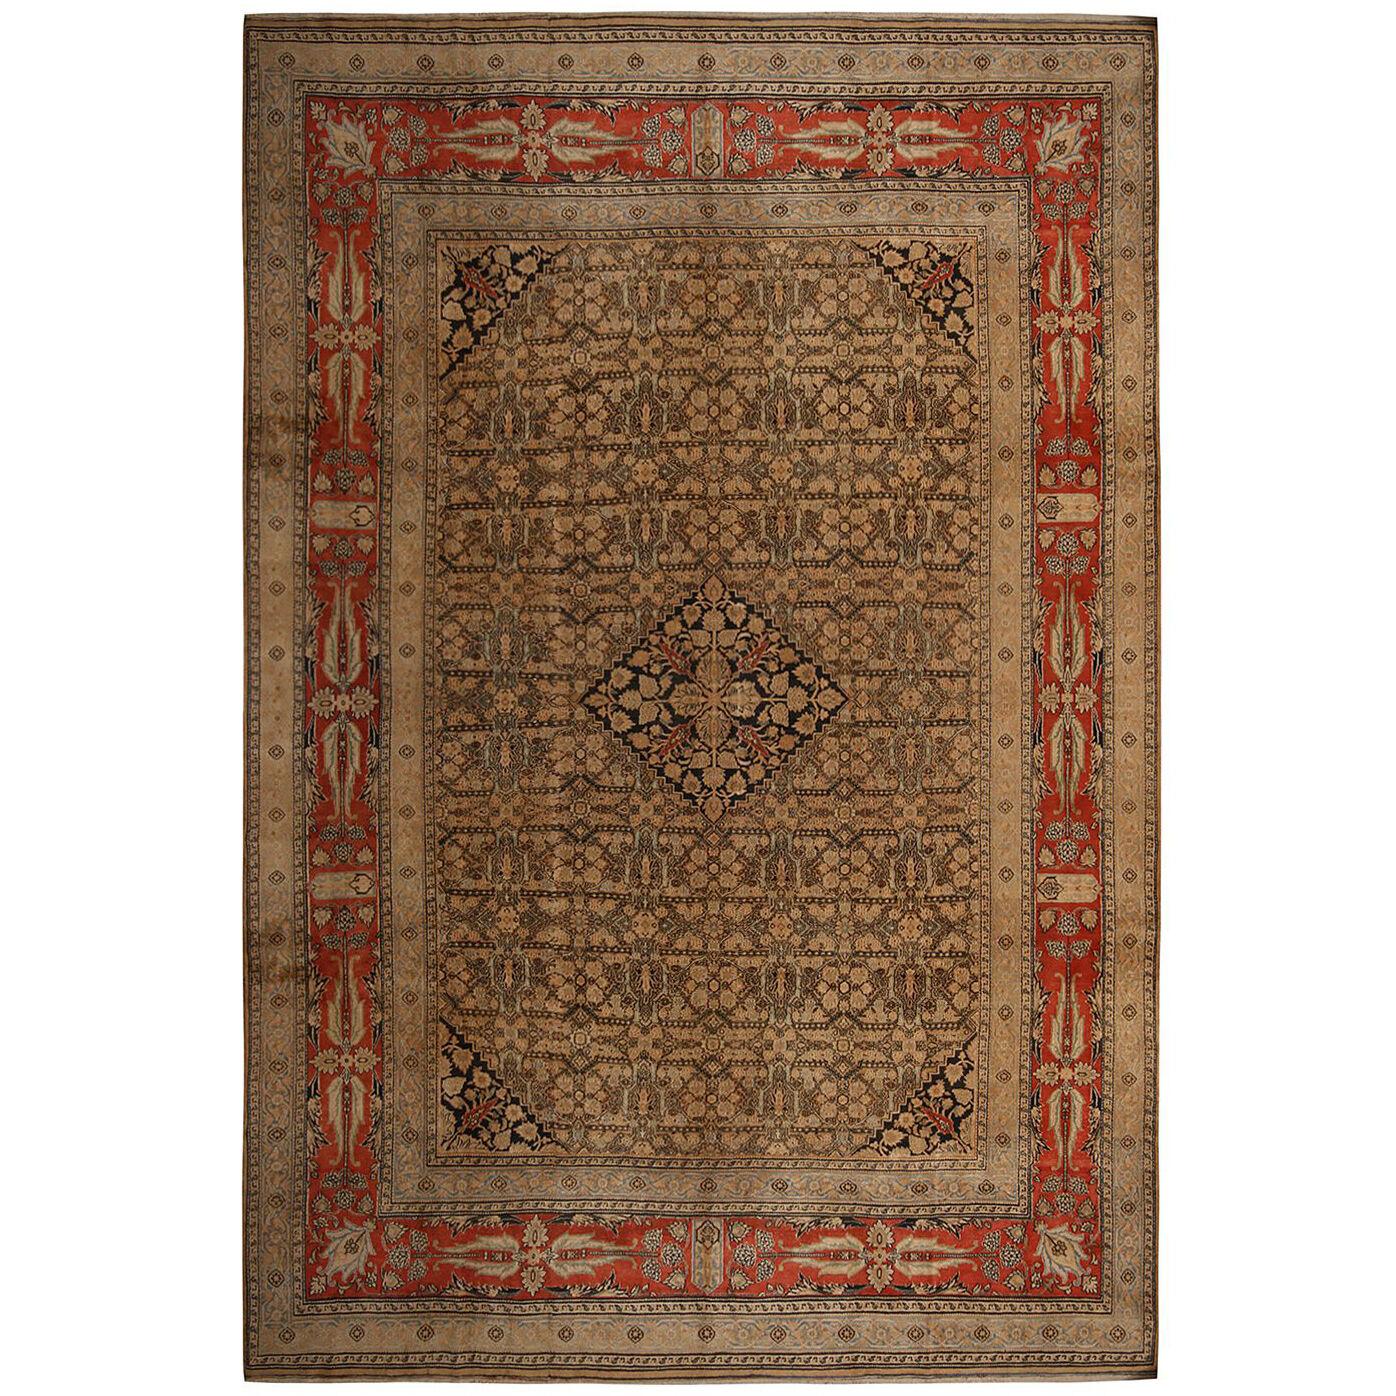 Antique Doroksh Traditional Beige-Brown and Red Wool Persian Rug